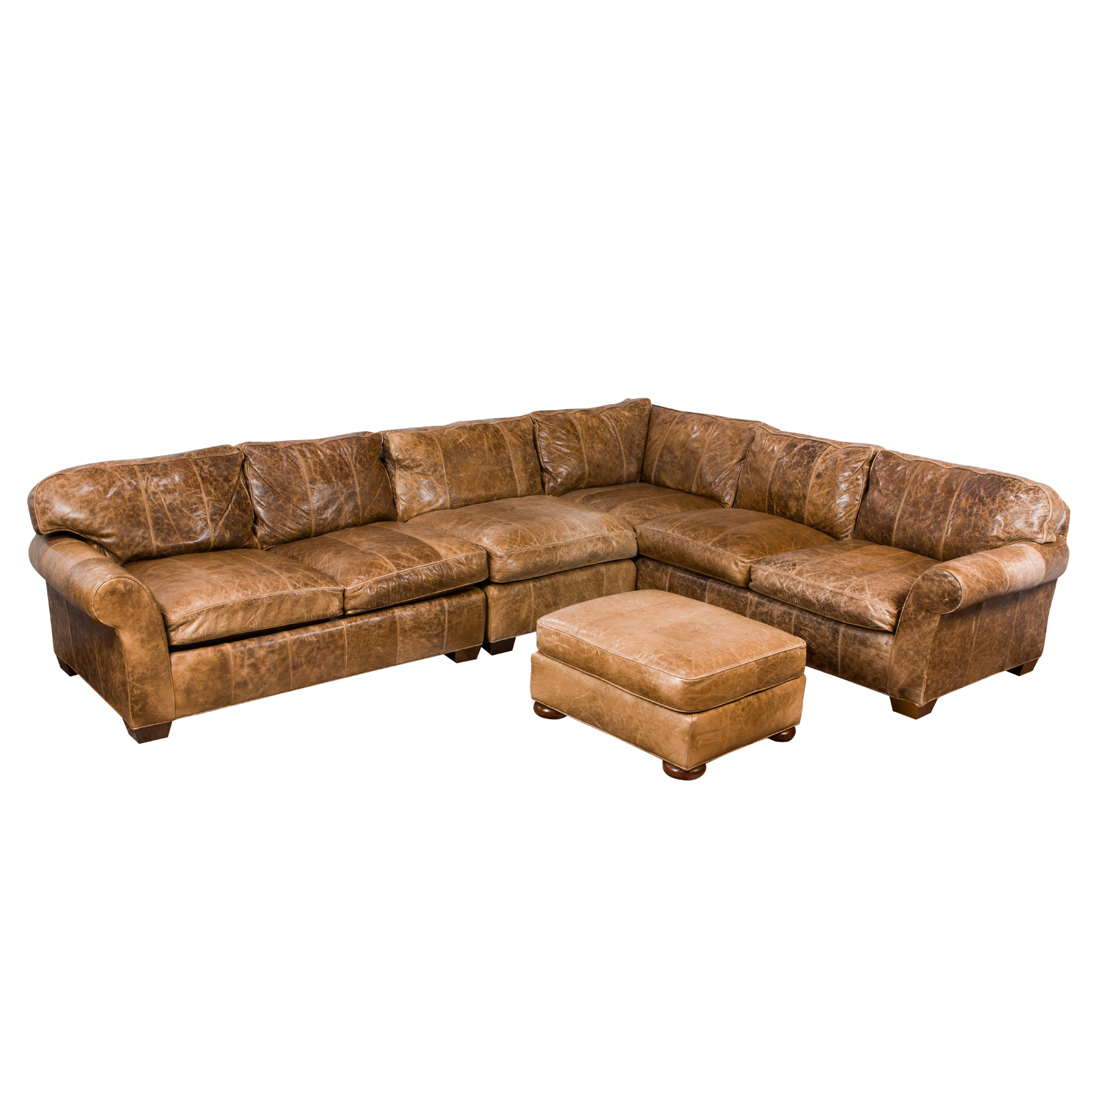 A CONTEMPORARY BROWN LEATHER SECTIONAL